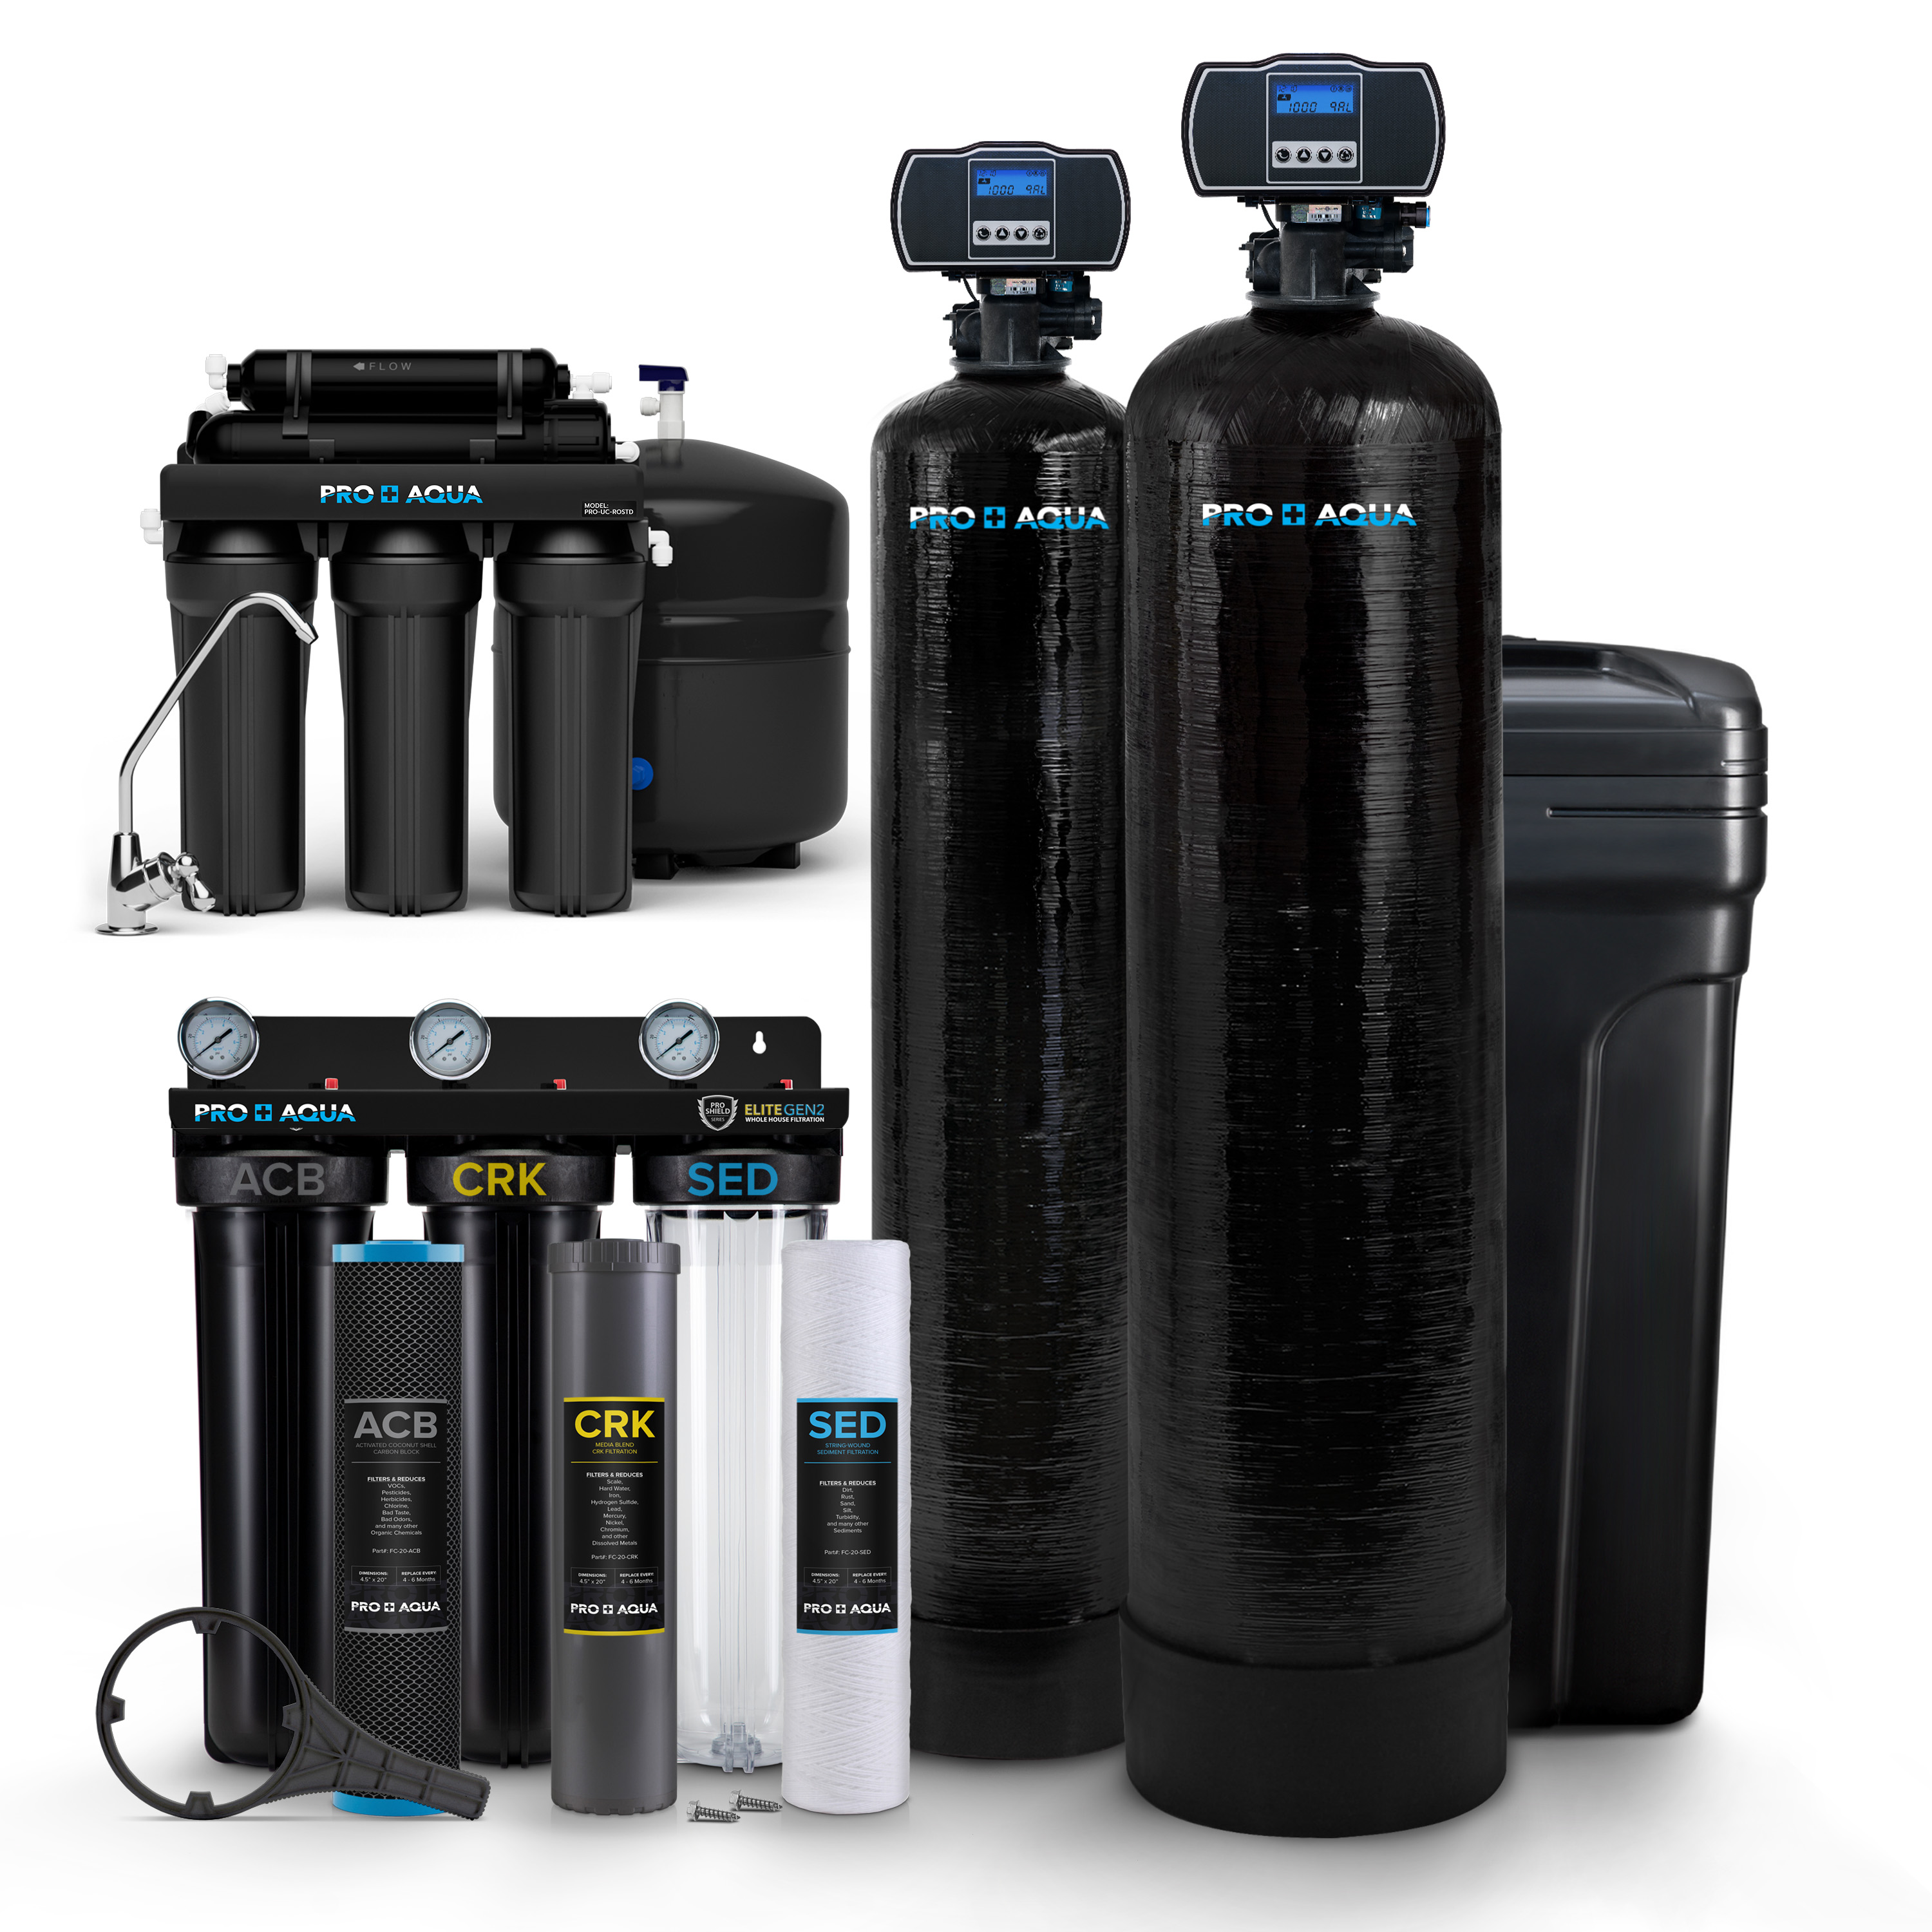 PRO+AQUA ELITE Well Water Filter Softener Bundle Plus Reverse Osmosis Drinking System For Iron, Odor, Color, Hardness